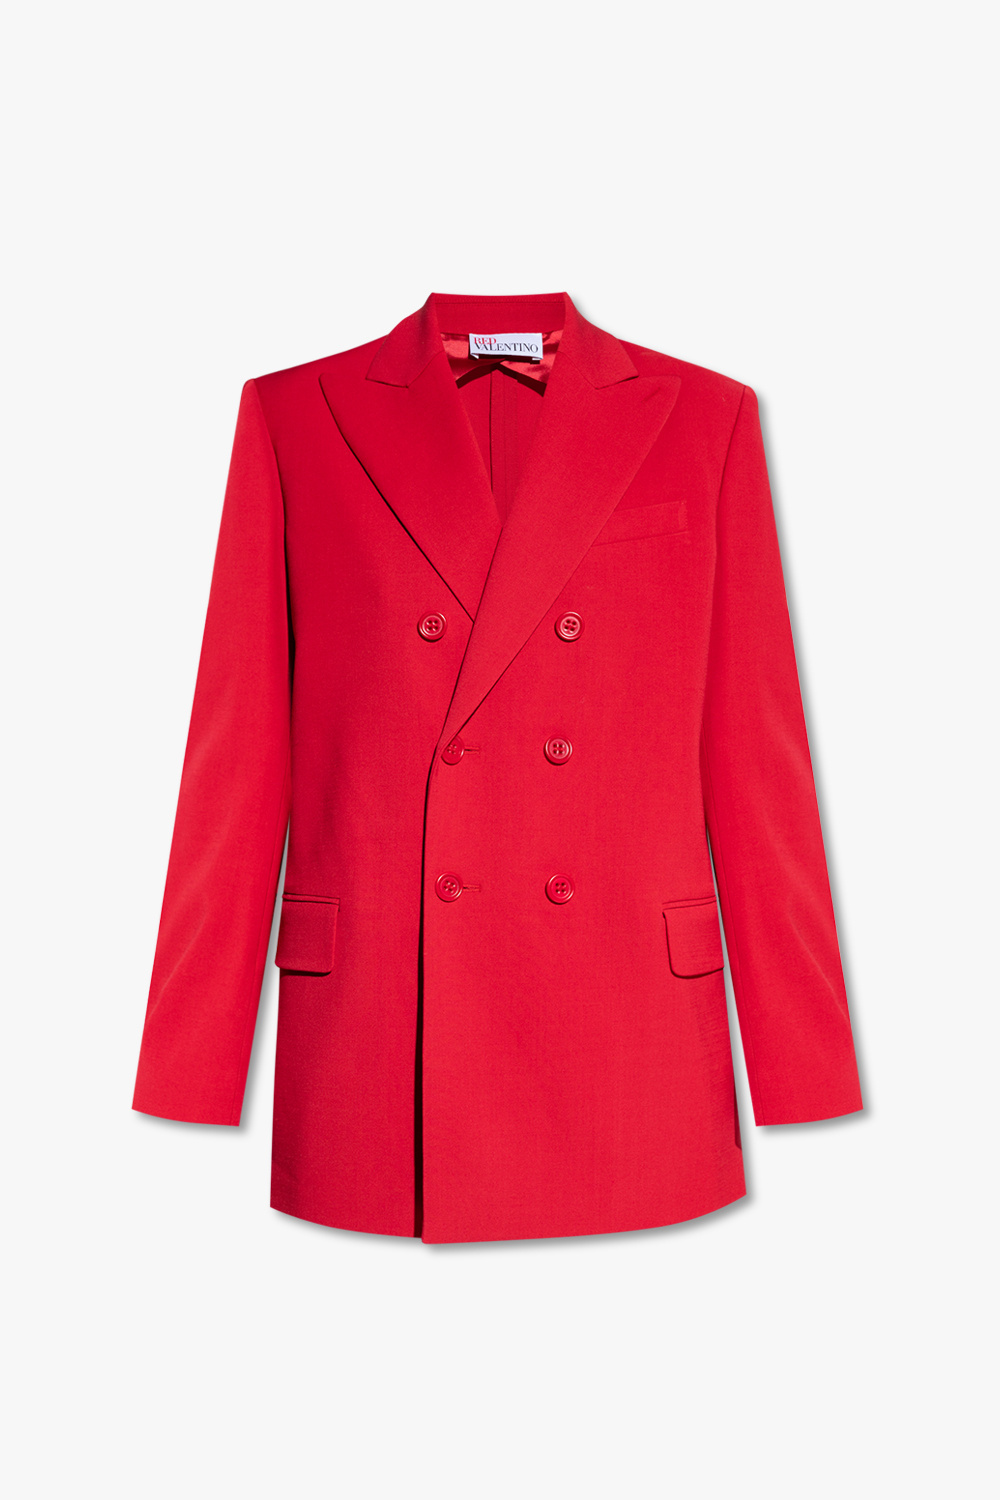 Red Valentino Double | breasted blazer - Women's Clothing Portefeuille Rosa Vps1r4155g - IetpShops